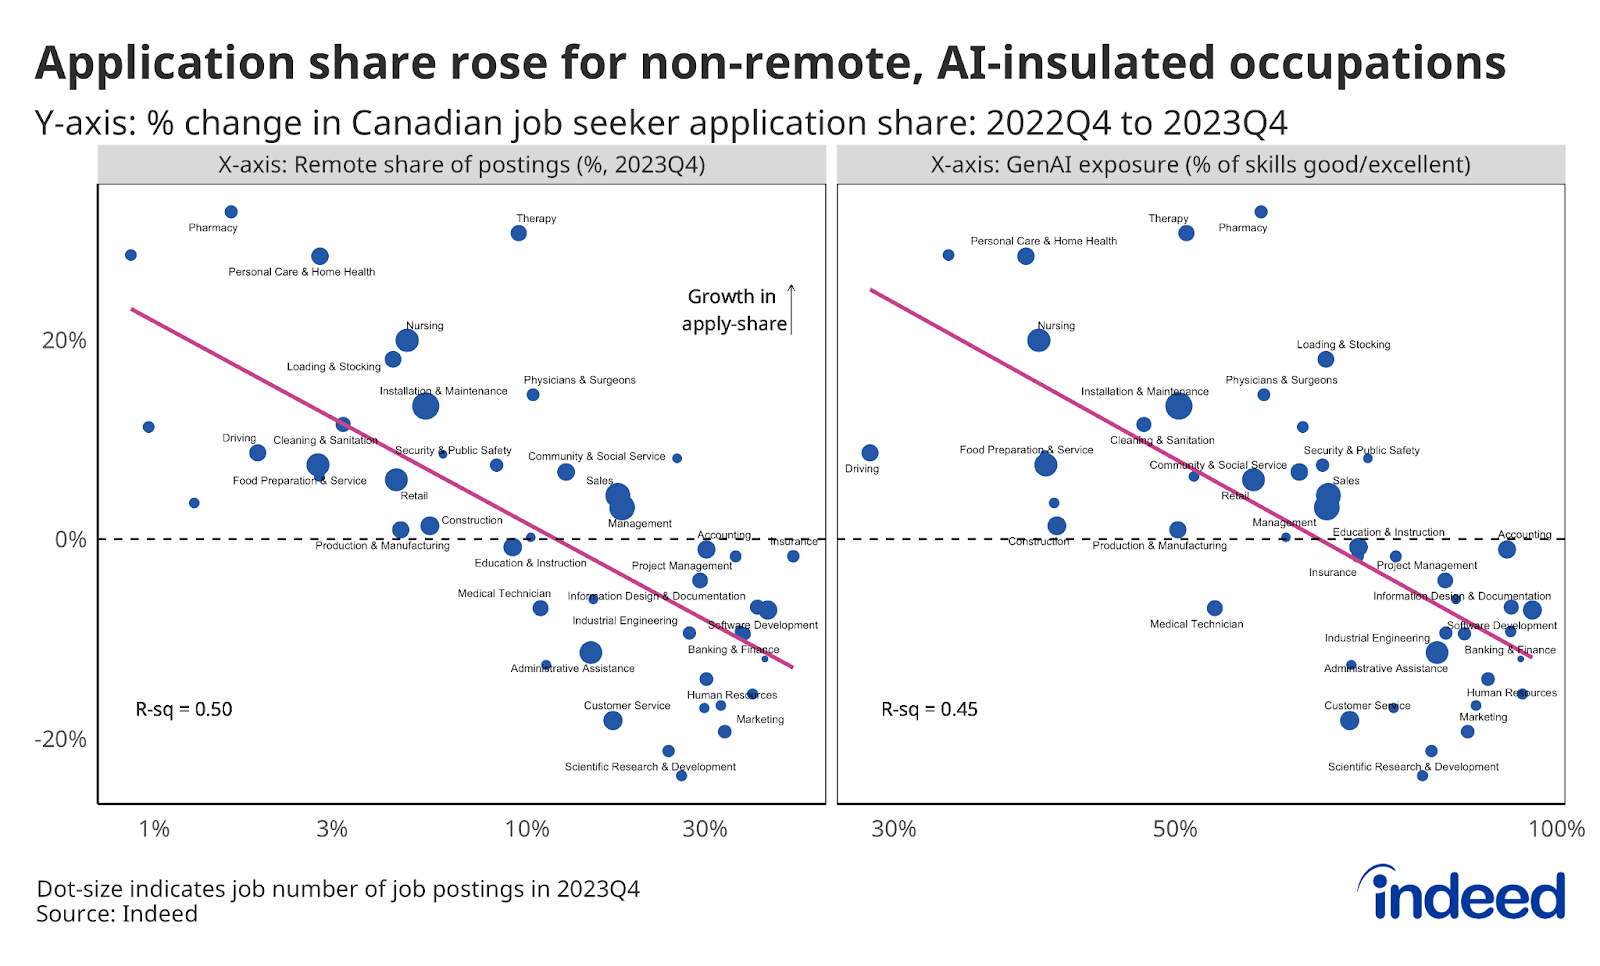 Two-panel scatter plot titled “Application share rose for non-remote, AI-insulated occupations” with individual data points showing the percent change in apply share between 2022Q4 and 2023Q4 on the y-axis, and the remote share of job postings, and GenAI exposure on the x-axis of the left and right panels, respectively. Both plots show significant negative correlations between application share and remote share, as well as GenAI exposure.